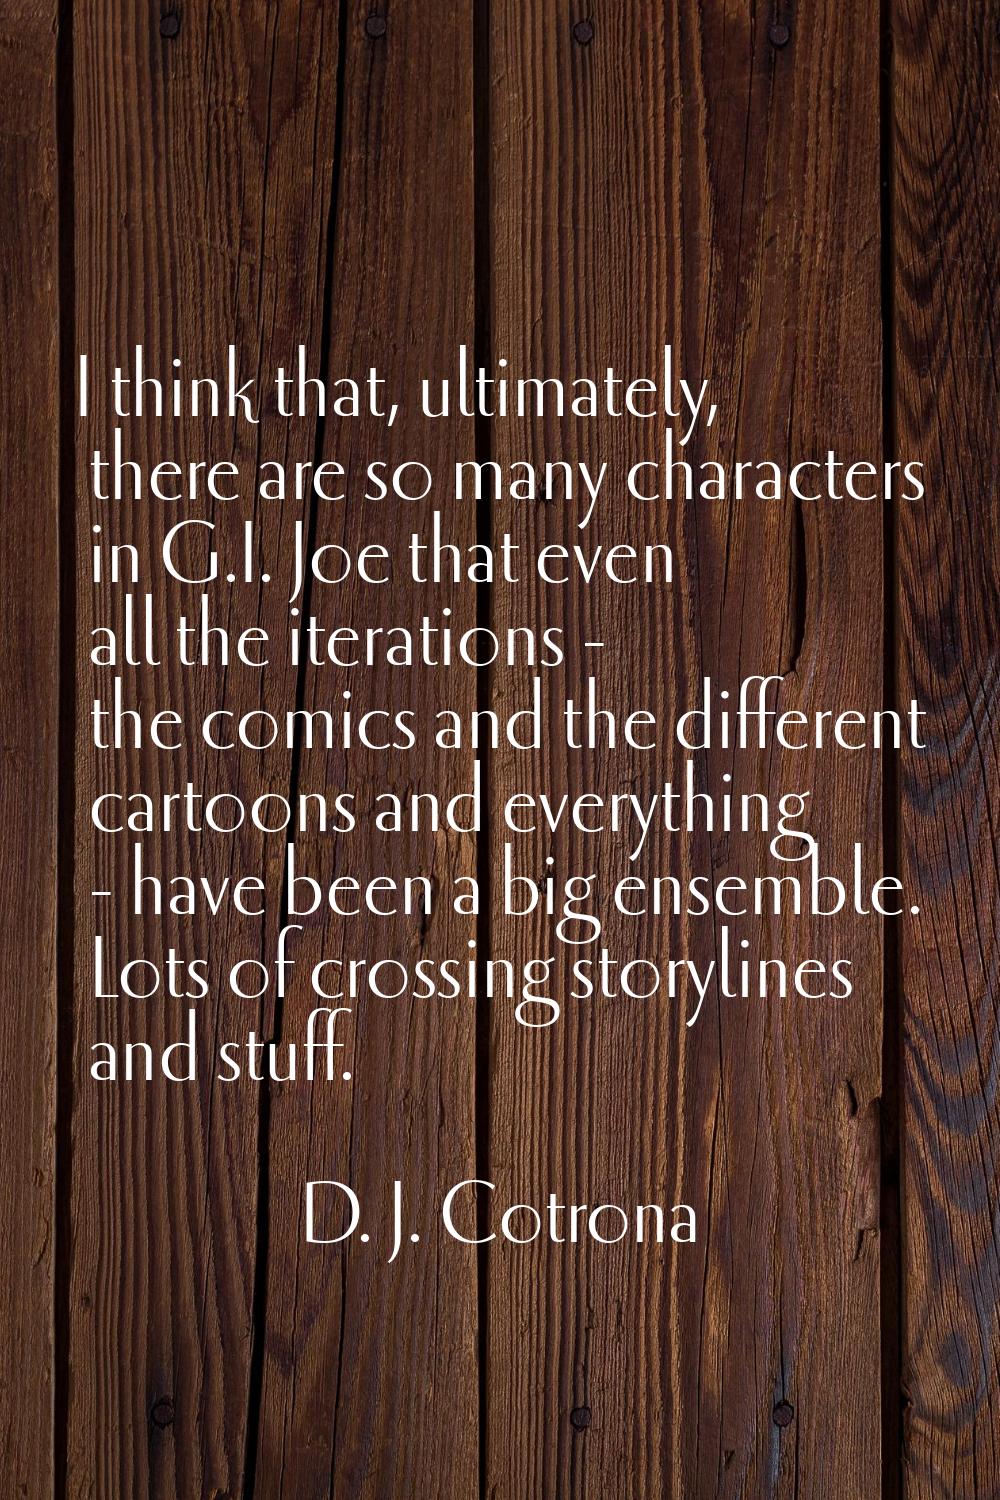 I think that, ultimately, there are so many characters in G.I. Joe that even all the iterations - t